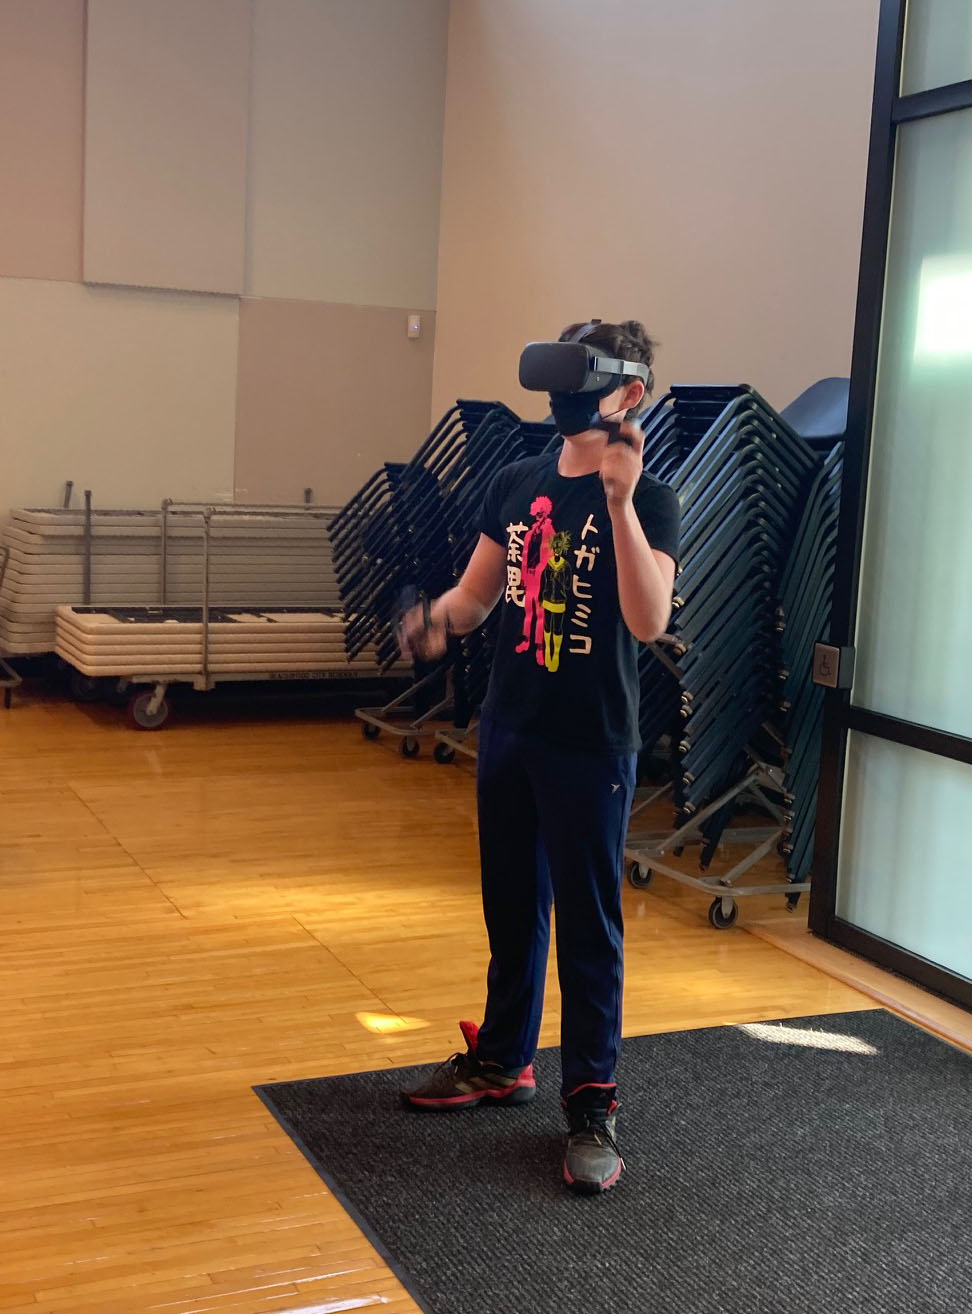 I’d like to see more people get into virtual reality, possibly just to play Beat Saber, sophomore Alex Johnson said.